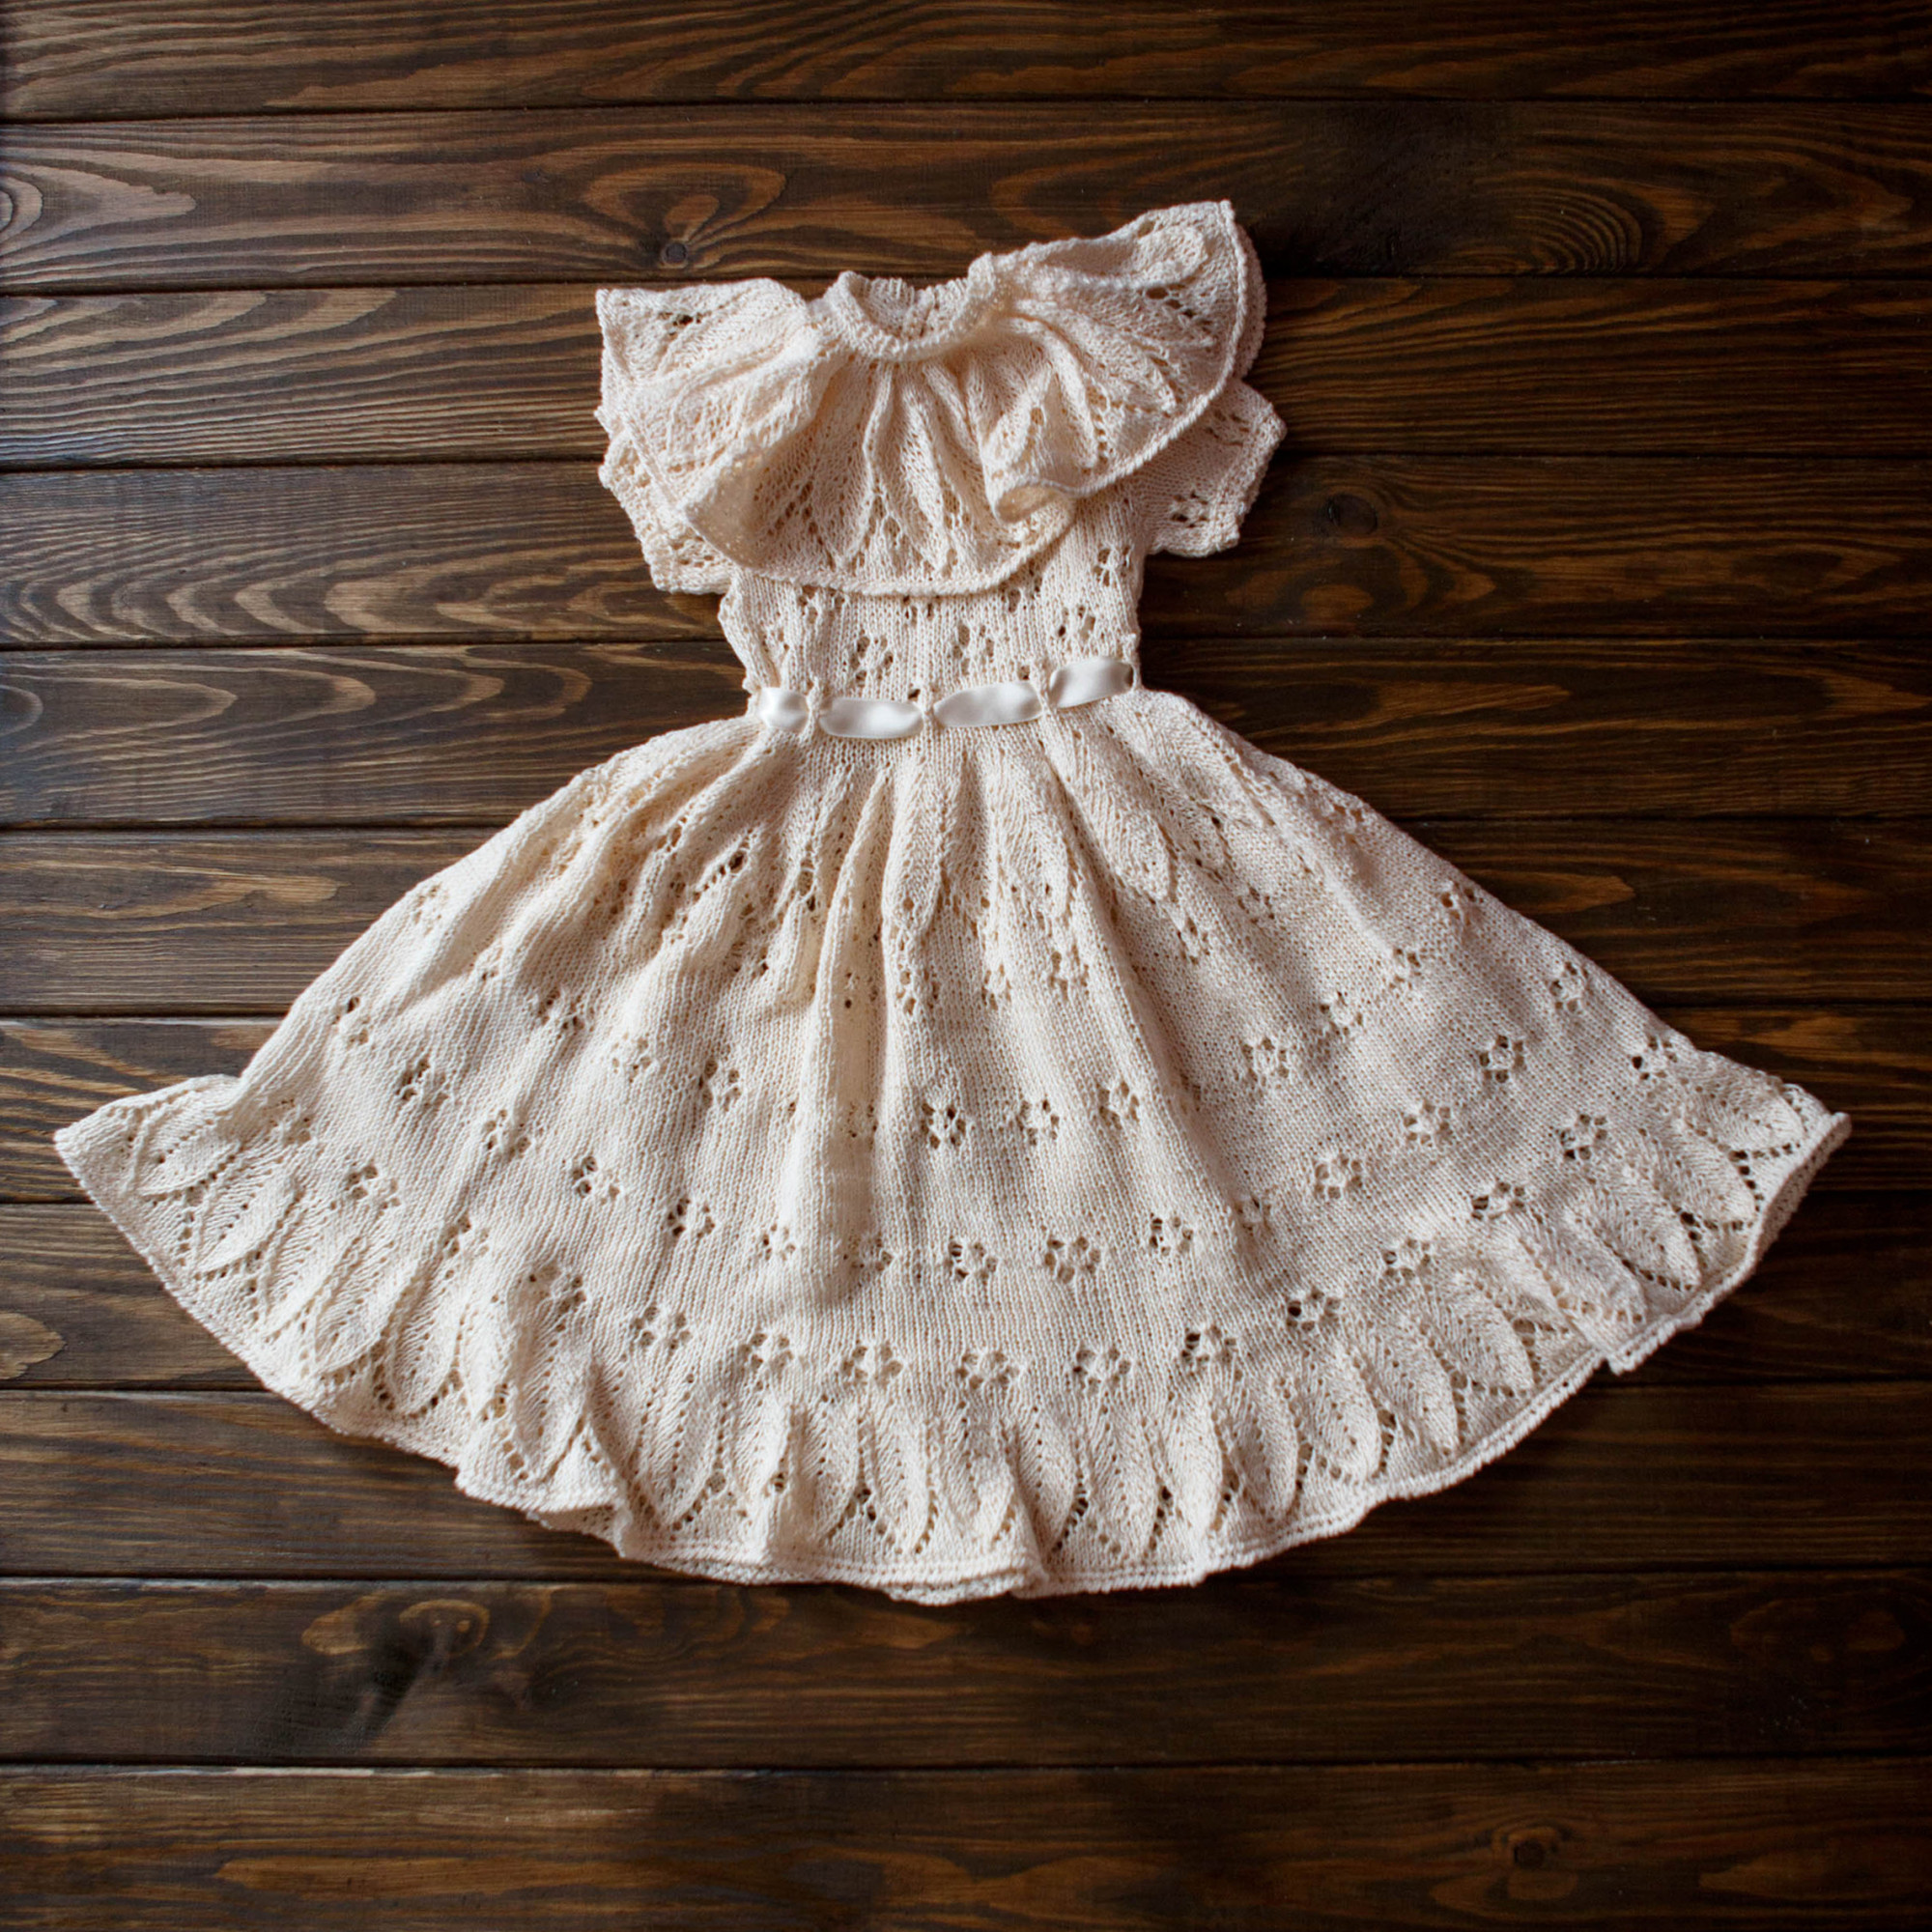 Hand Knitted Dress with lace collar Size 18 months Height 86 cm